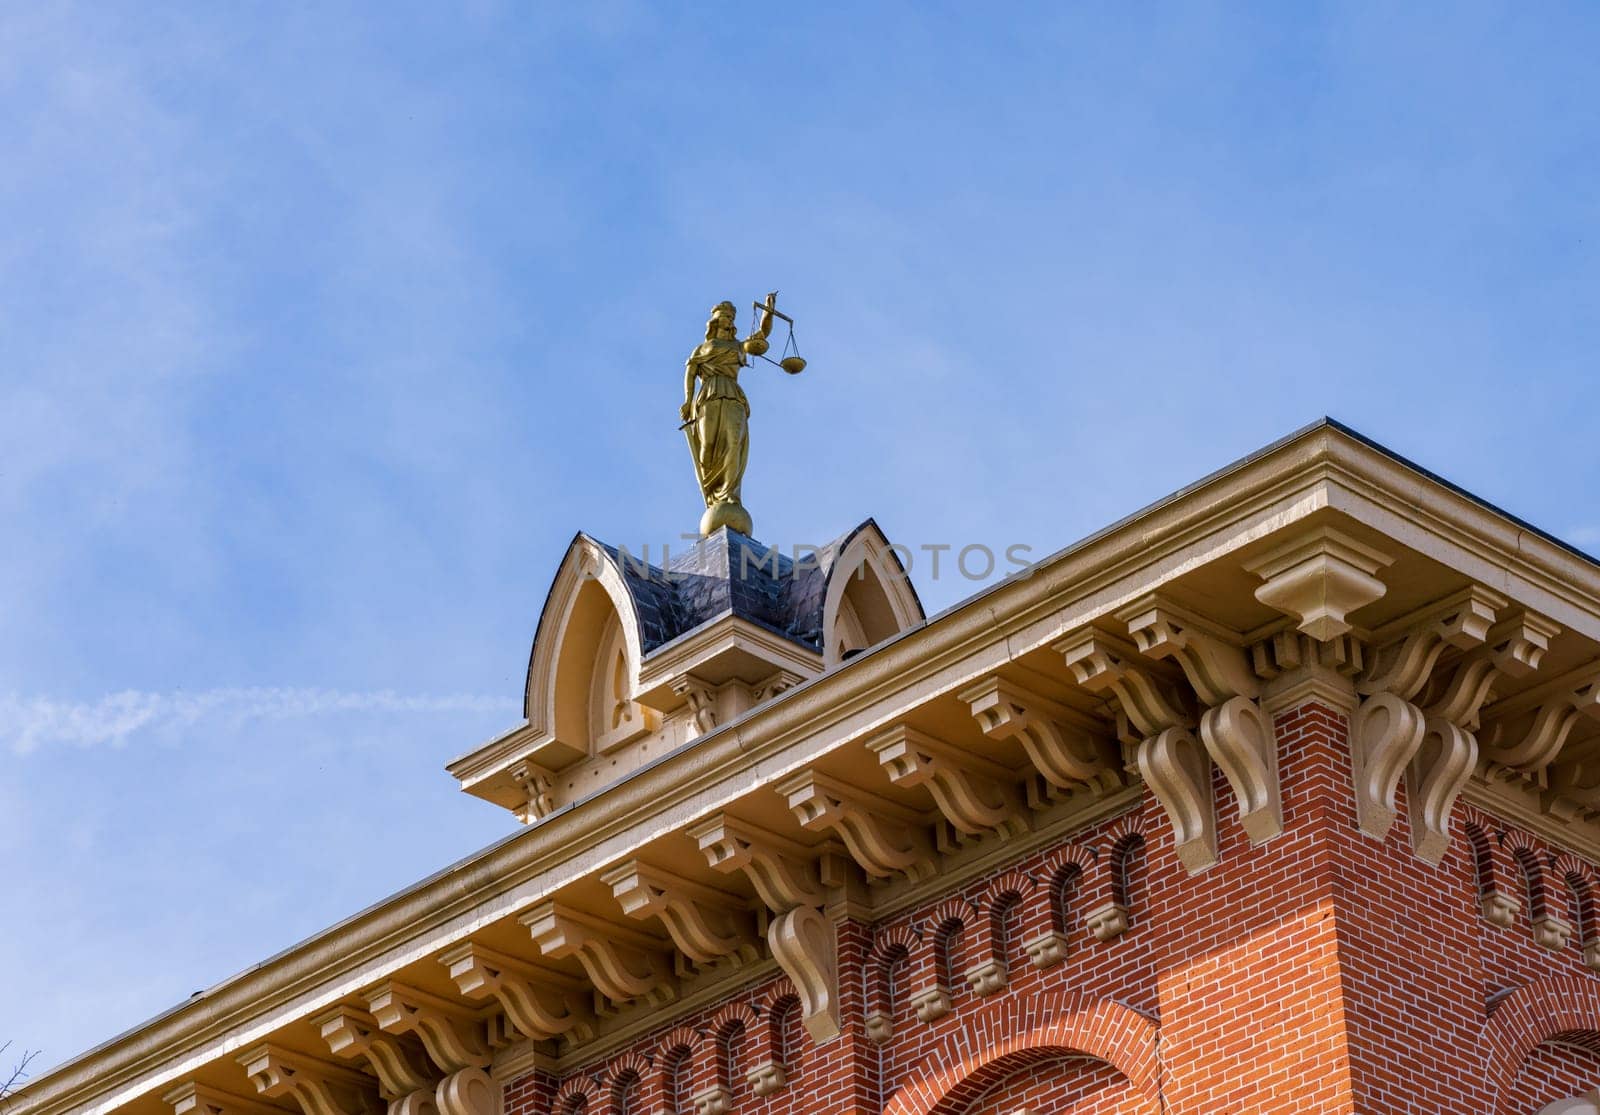 Statue to Lady Justice on the roof of the Delaware County courthouse in Ohio by steheap